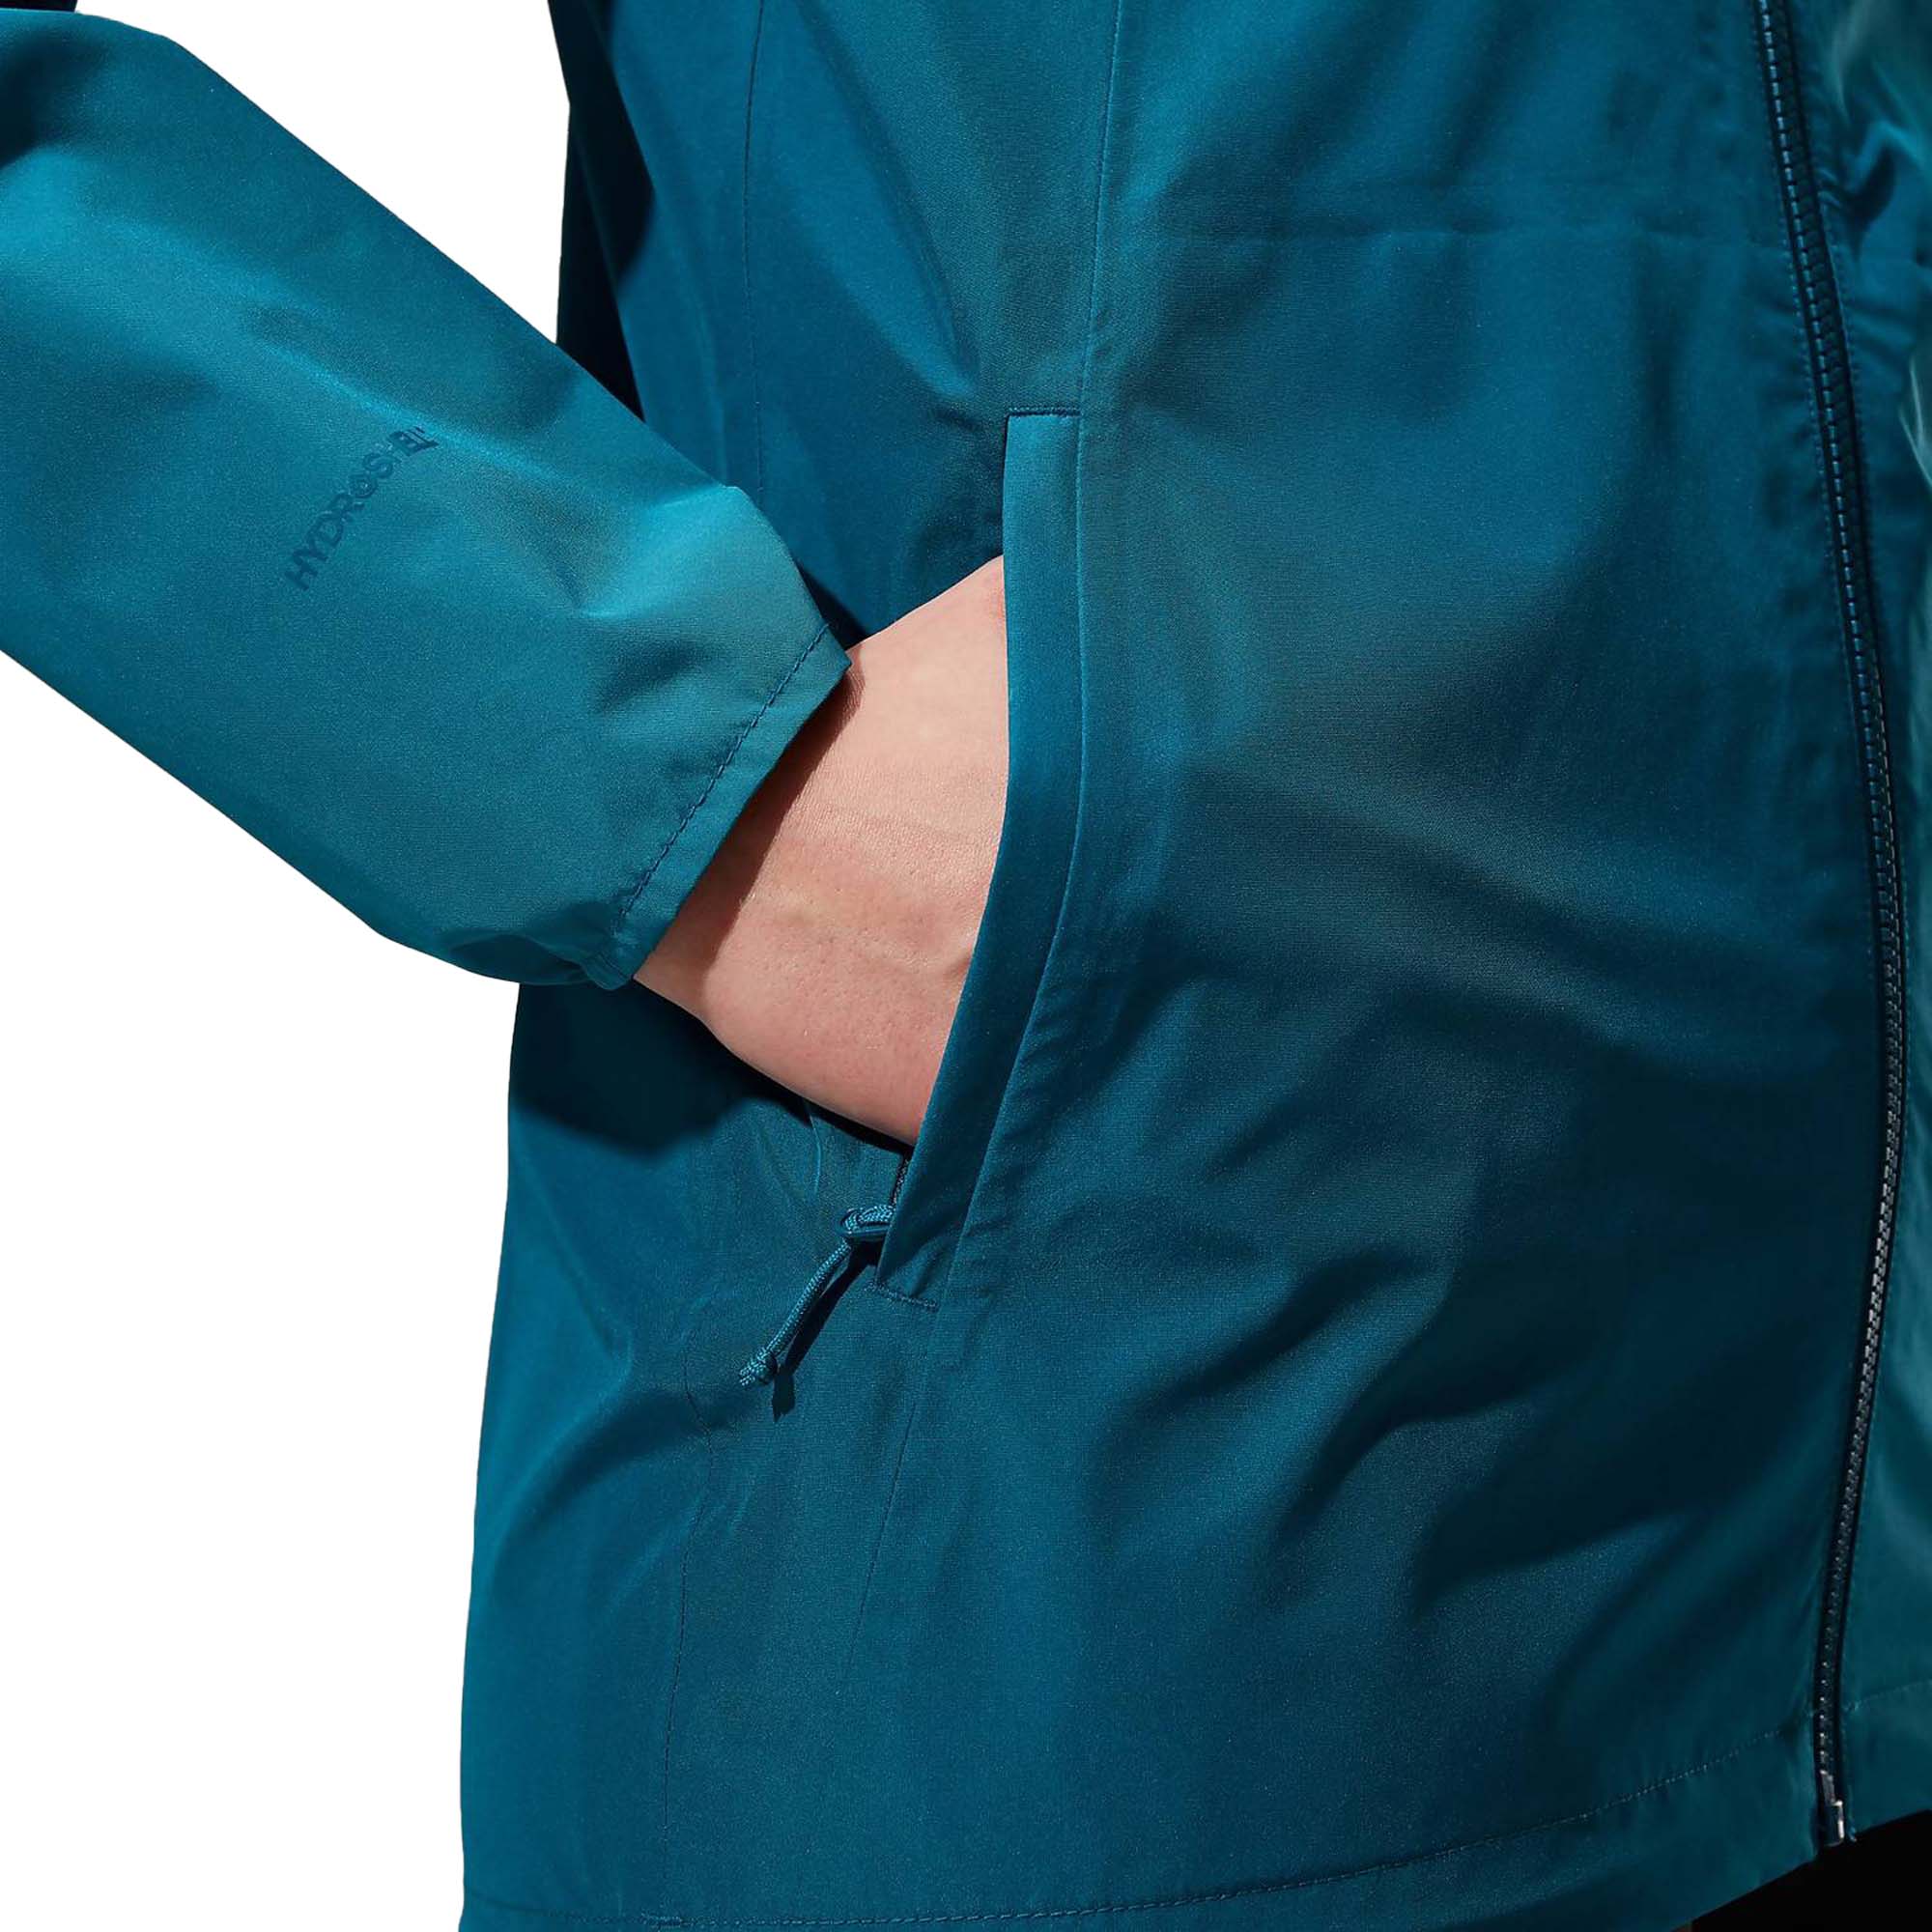 Berghaus Deluge Pro 3.0 Women's Insulated Jacket